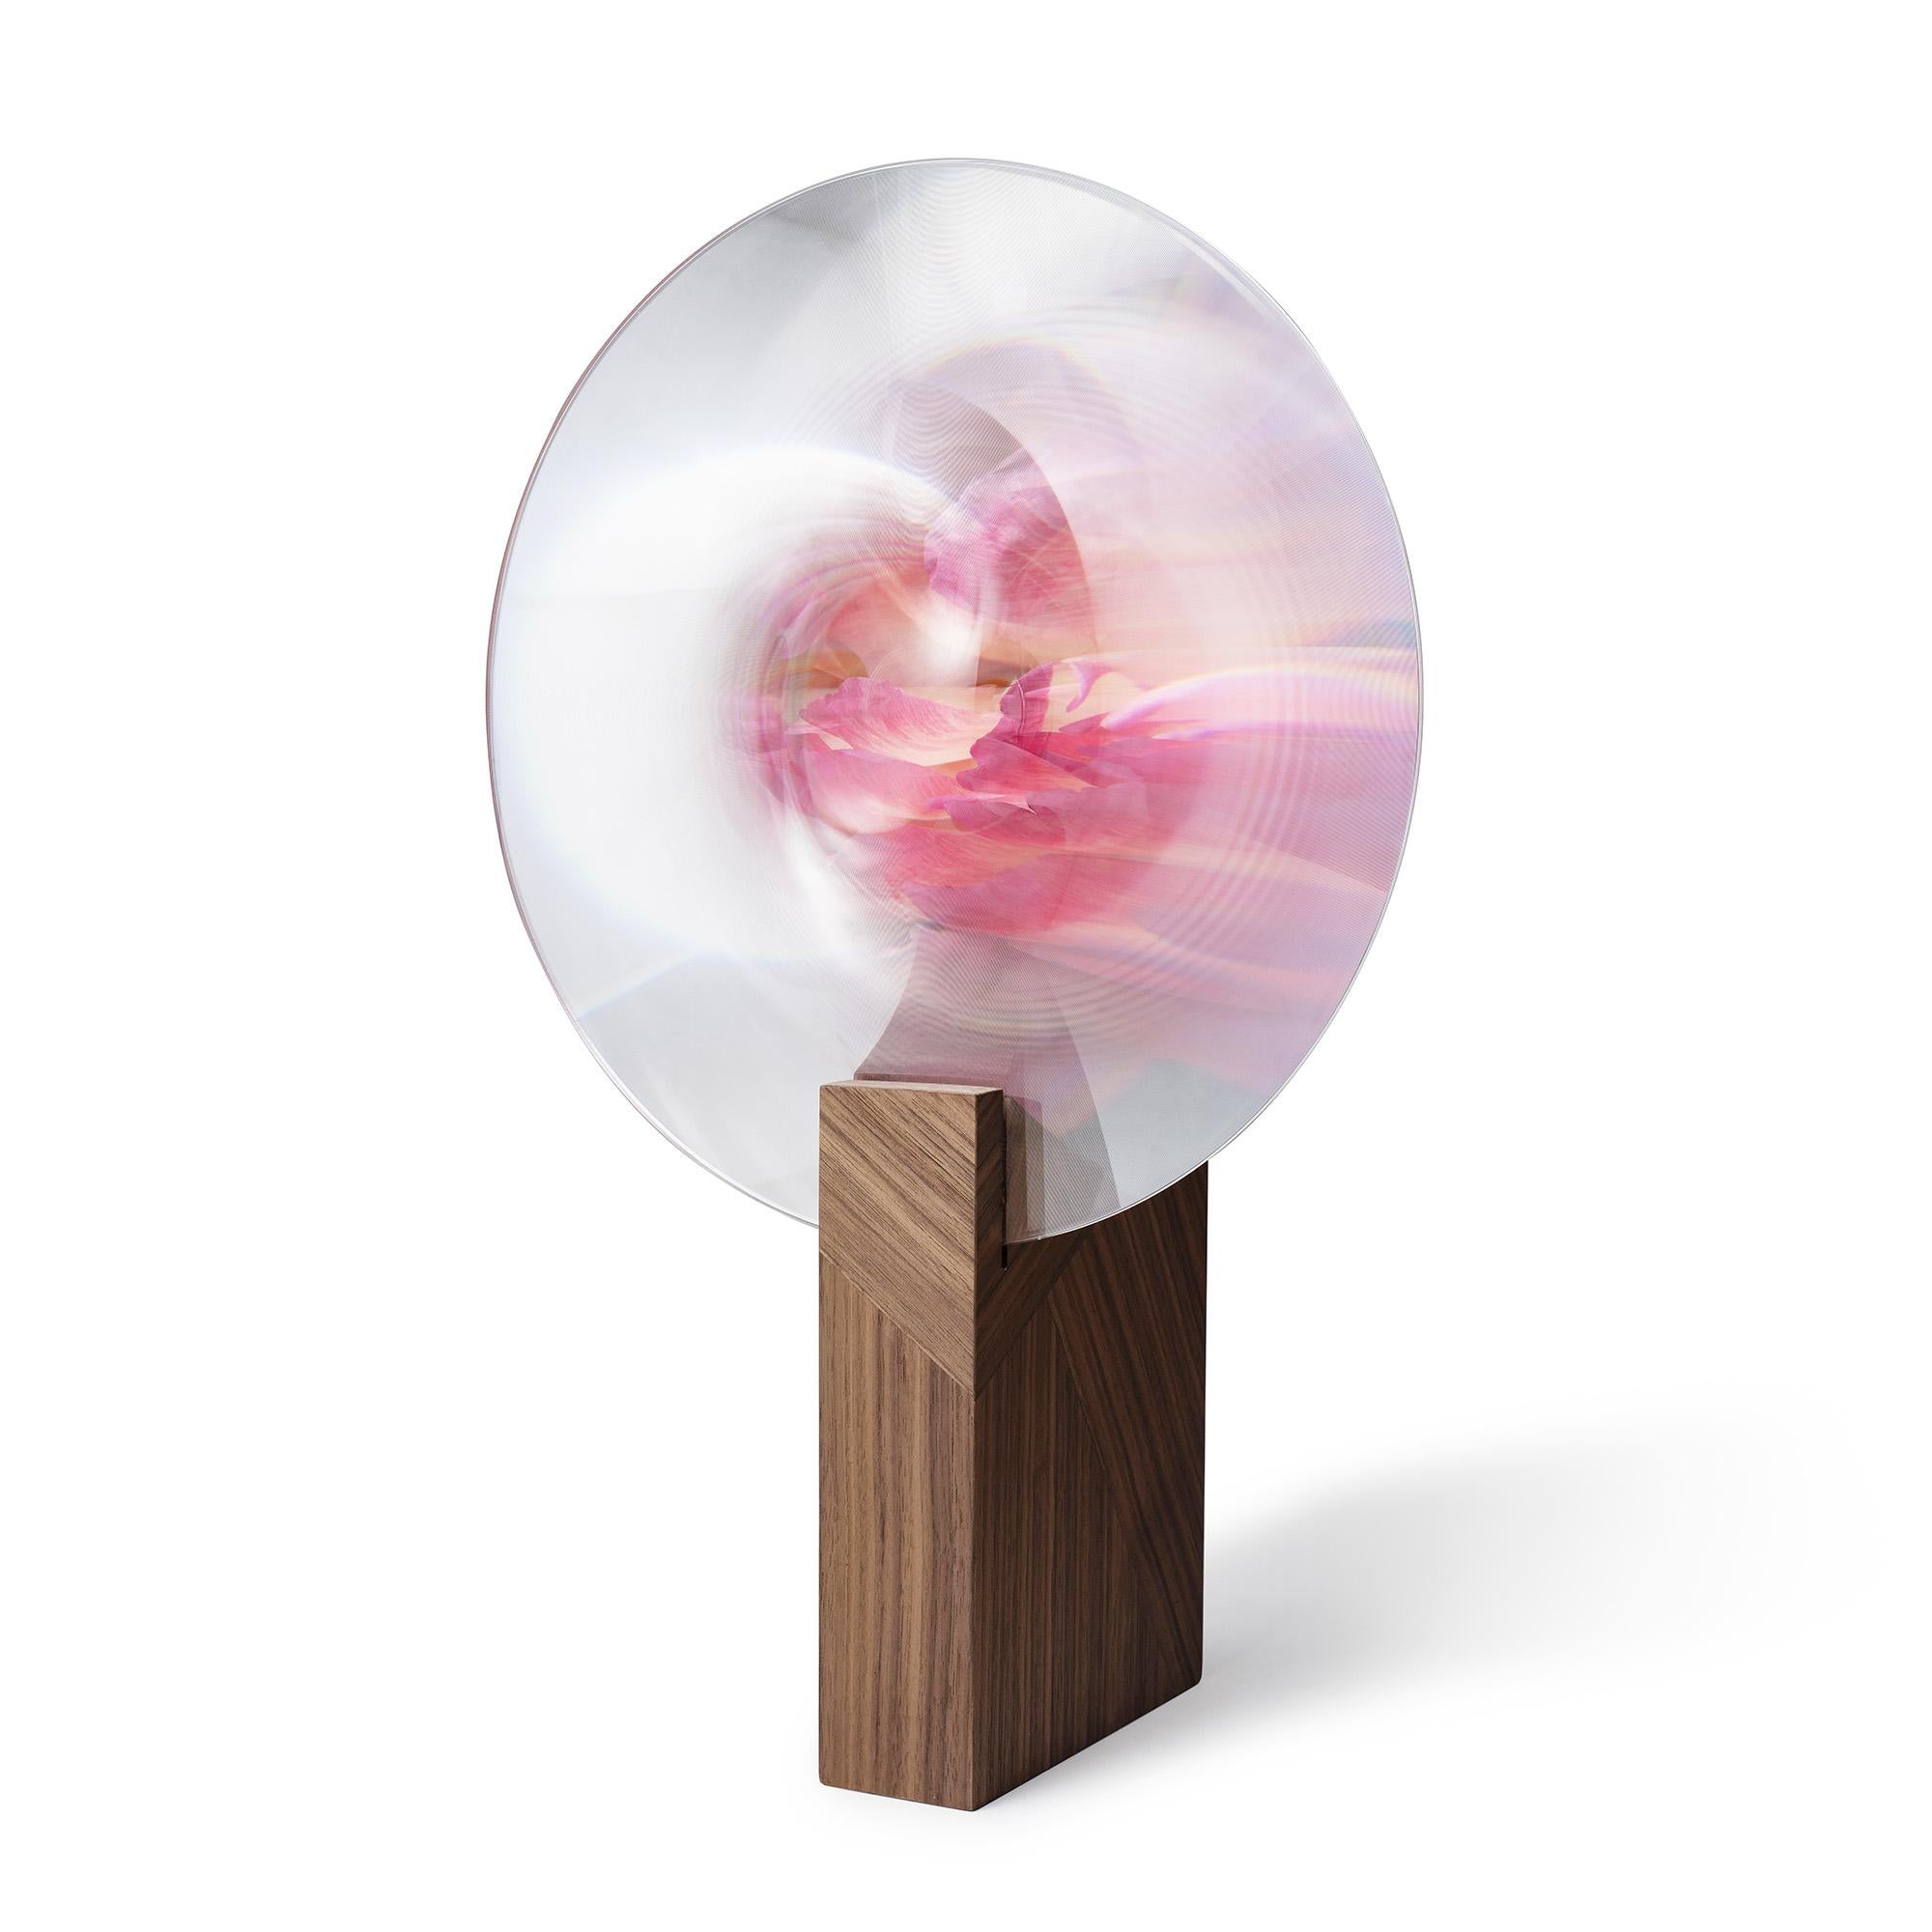 Walnut Narcisse vase by Najma Temsoury
Dimensions: D 16.6 x W 30 x H 45 cm.
Materials: Solid wood with veneer, stainless steel tube, the lens in PMMA with diameter 300 mm.
Also available in colors: Walnut, oak, black. 


The myth of Narcissus